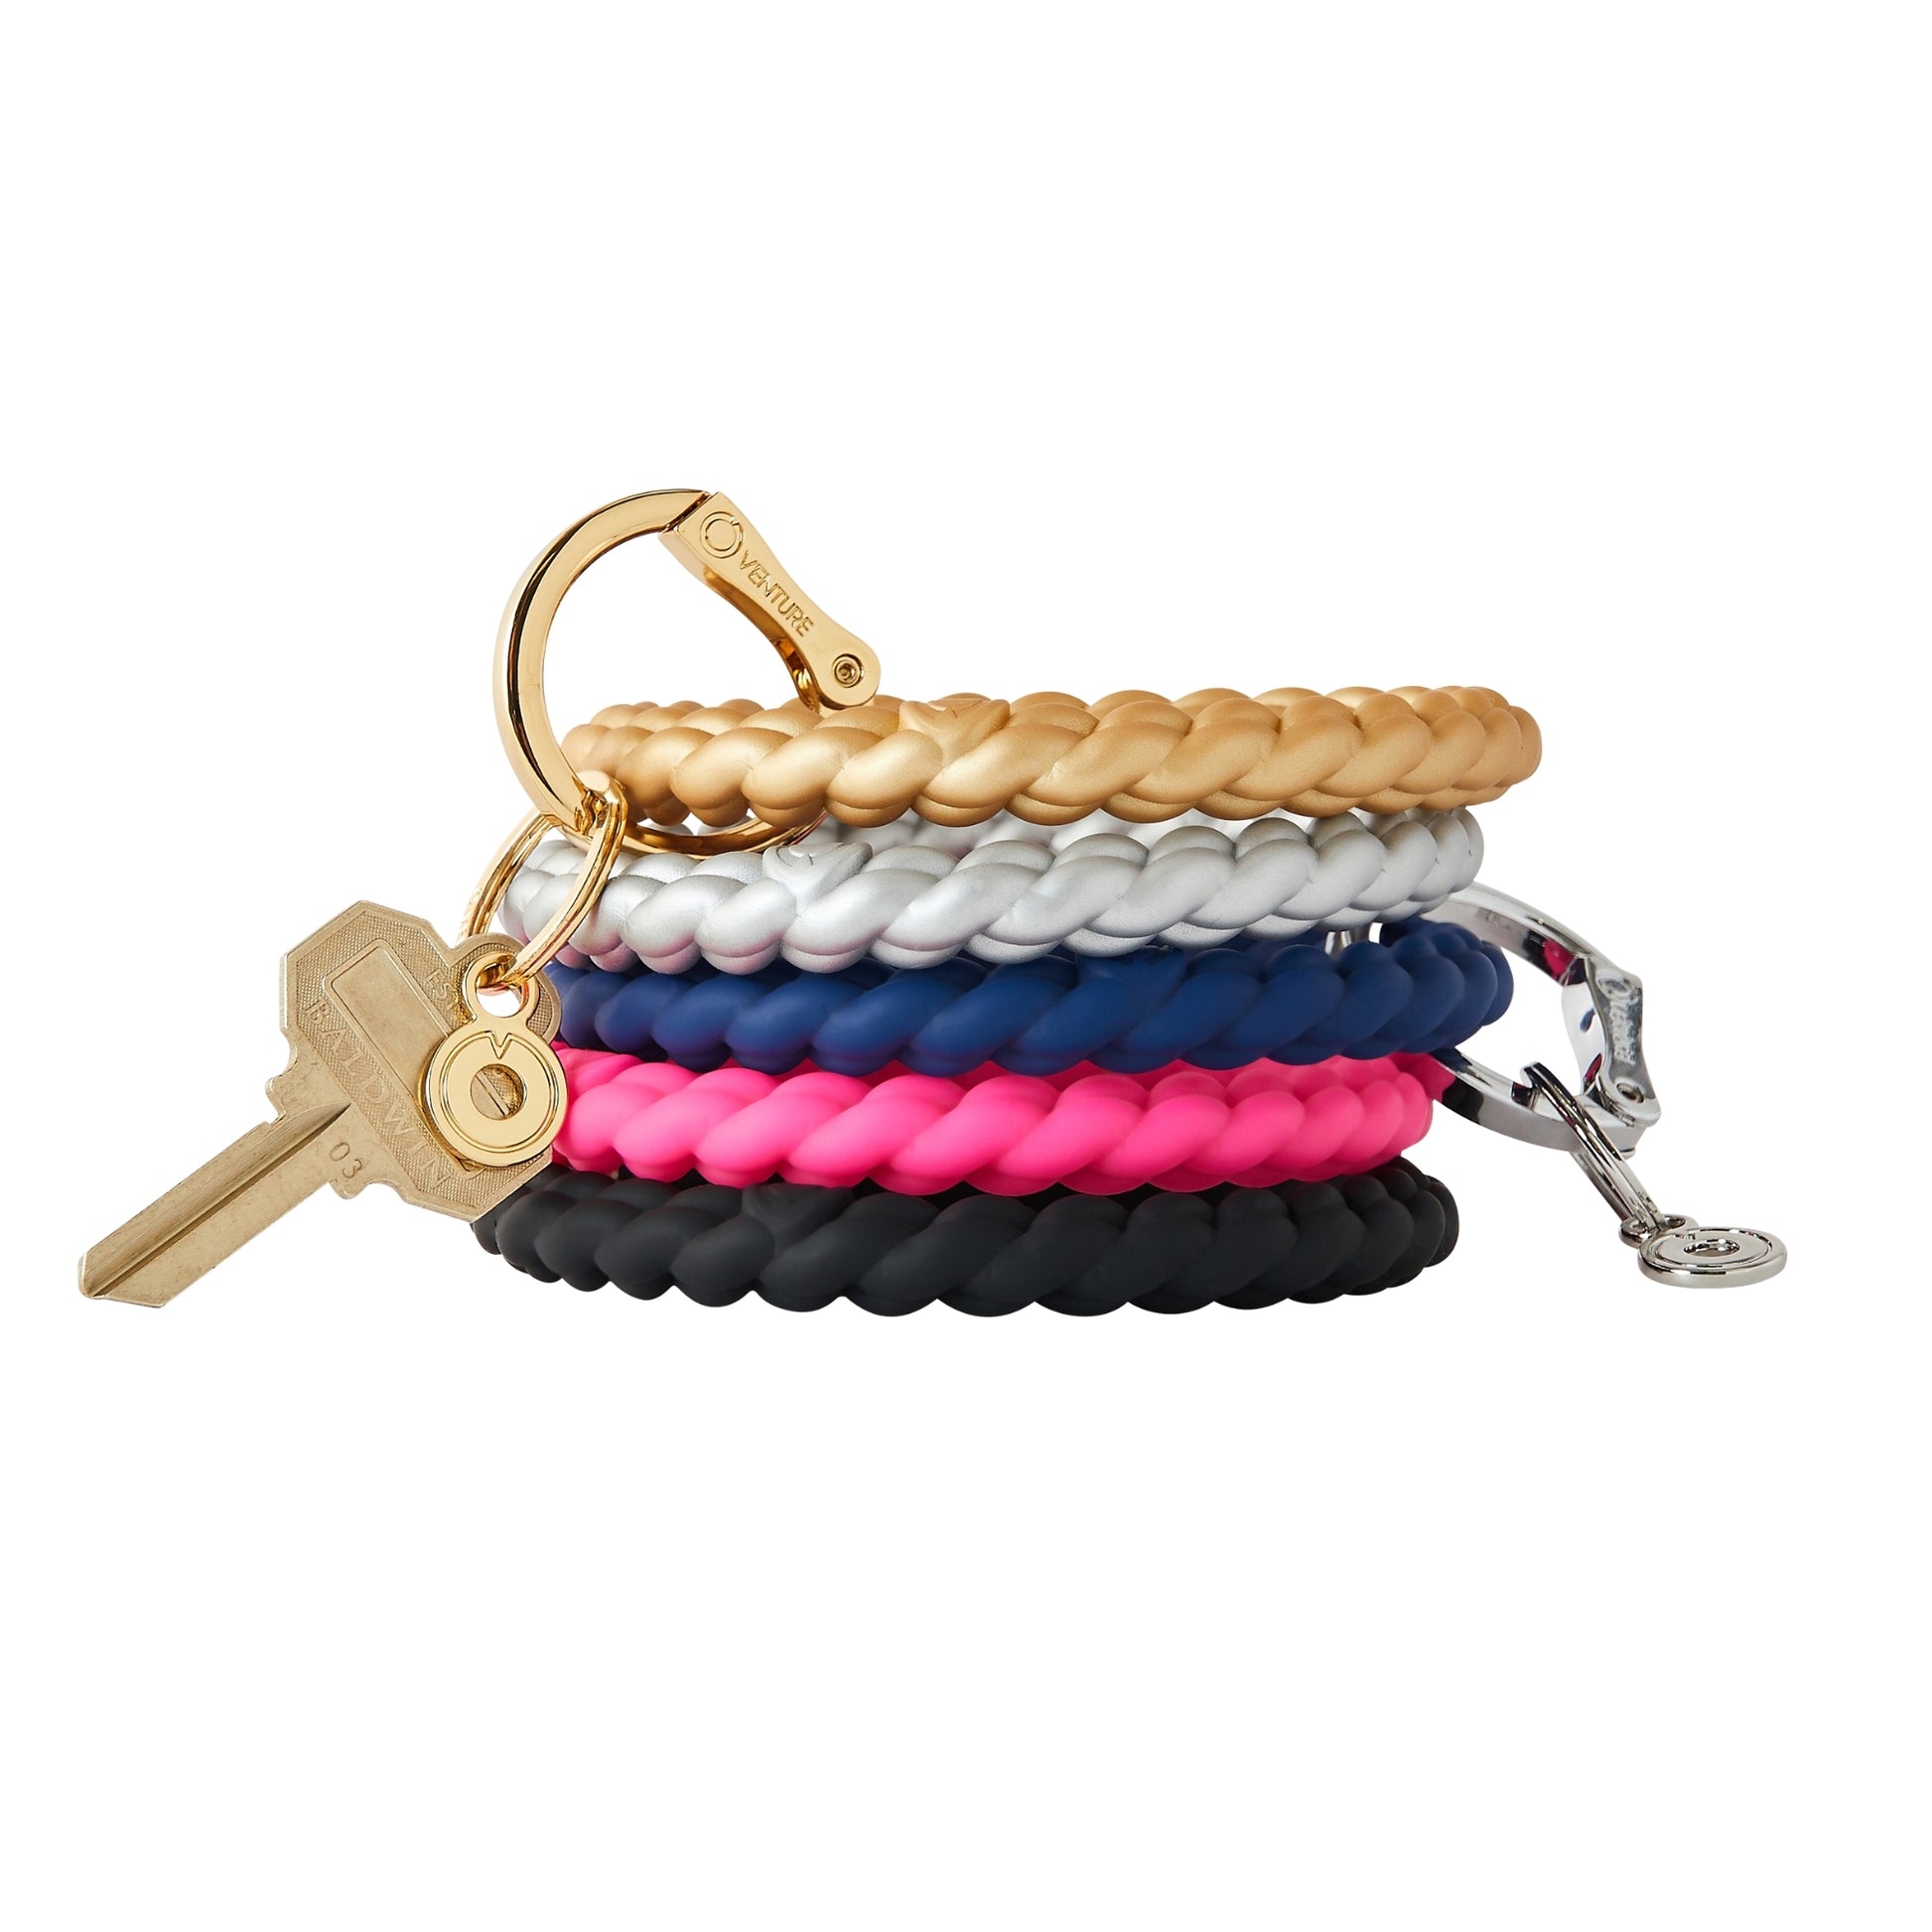 Oventure Silicone Big O Key Ring in Rose Gold Marble - Her Hide Out